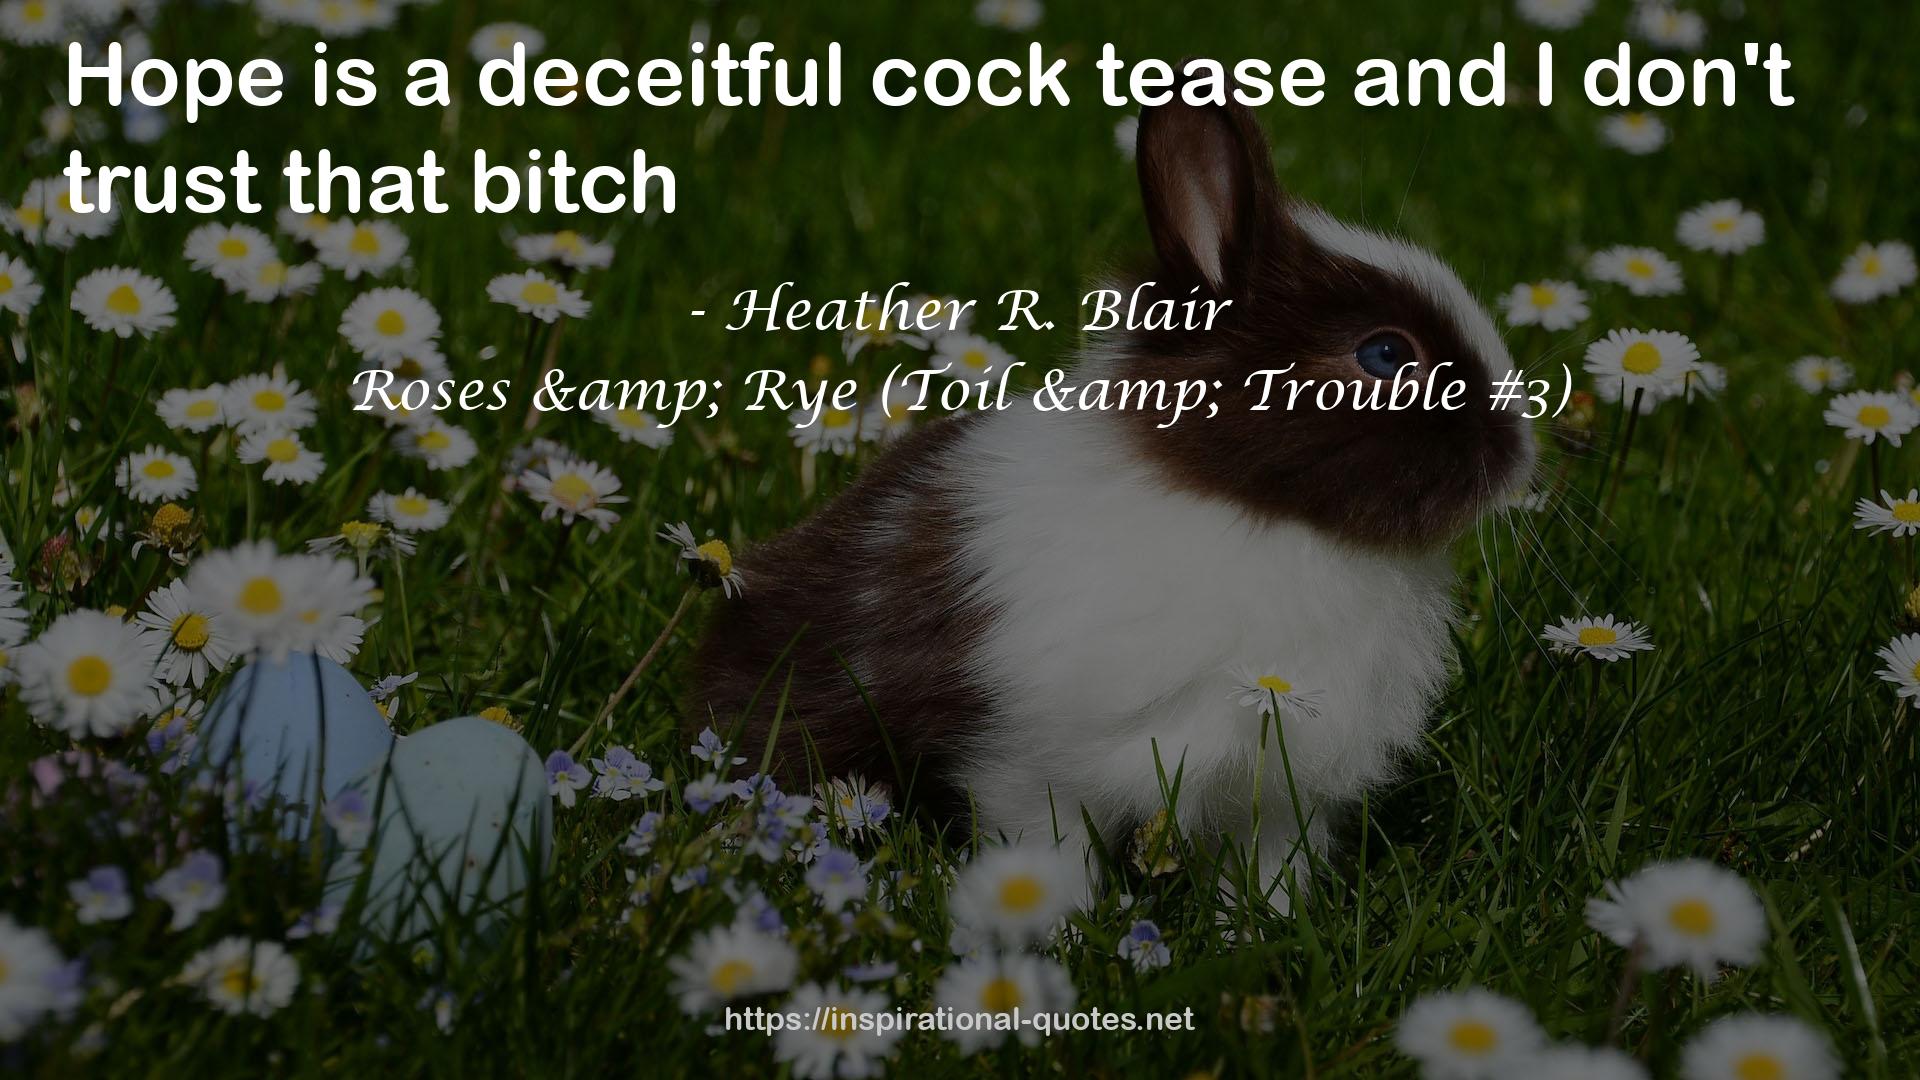 Roses & Rye (Toil & Trouble #3) QUOTES